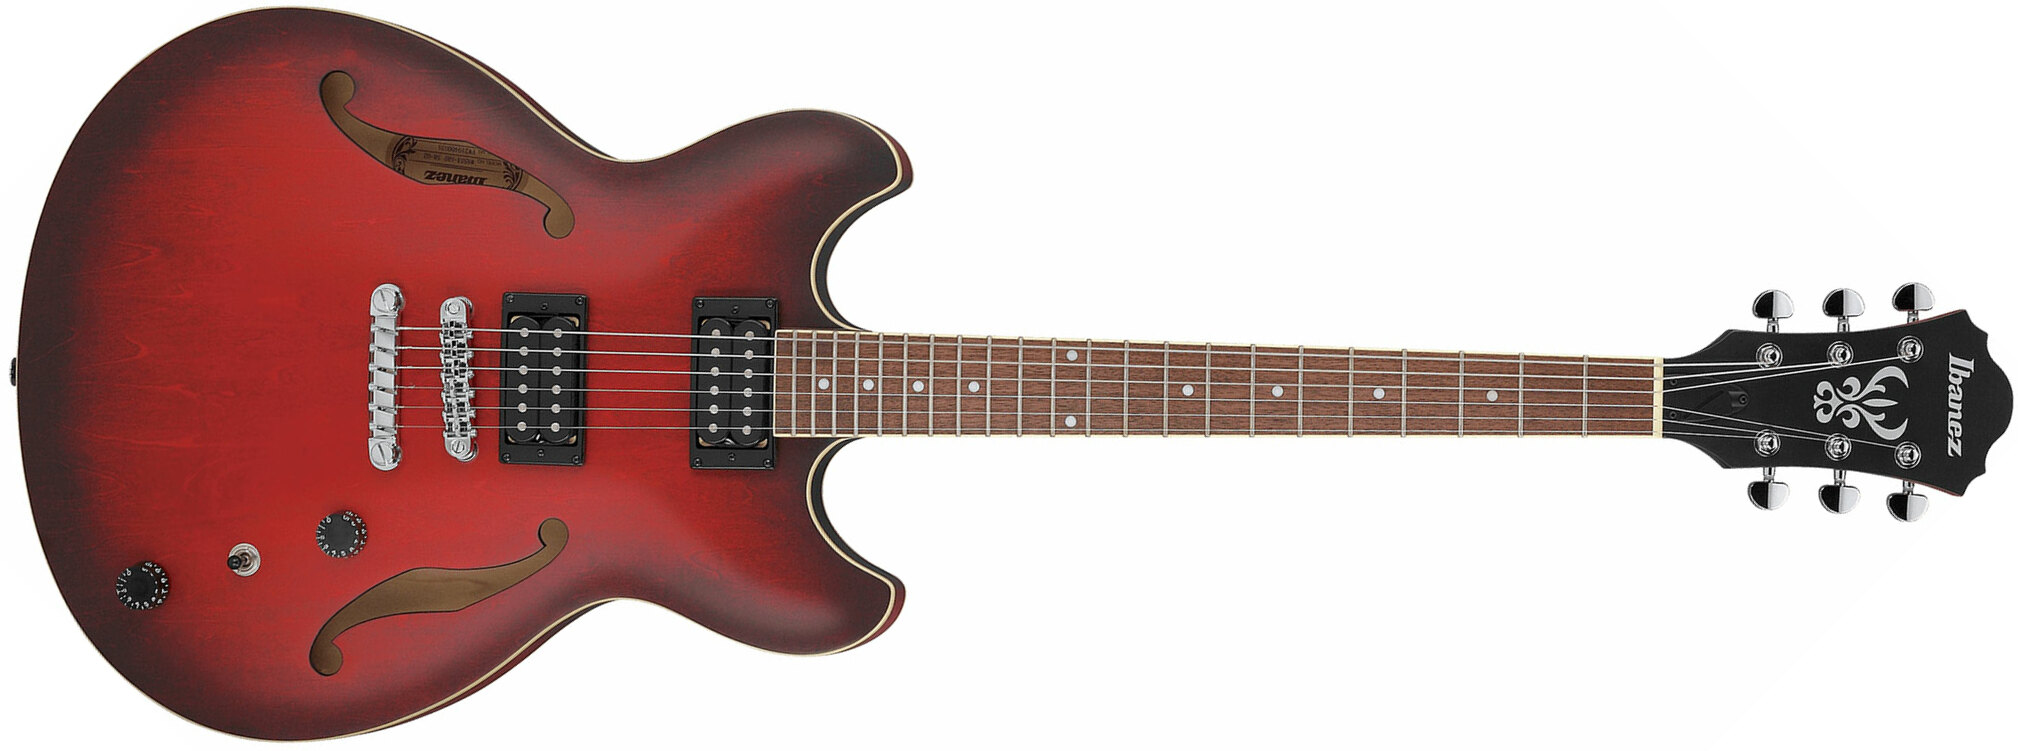 Ibanez As53 Srf Artcore Hh Ht Noy - Sunburst Red Flat - Semi-hollow electric guitar - Main picture